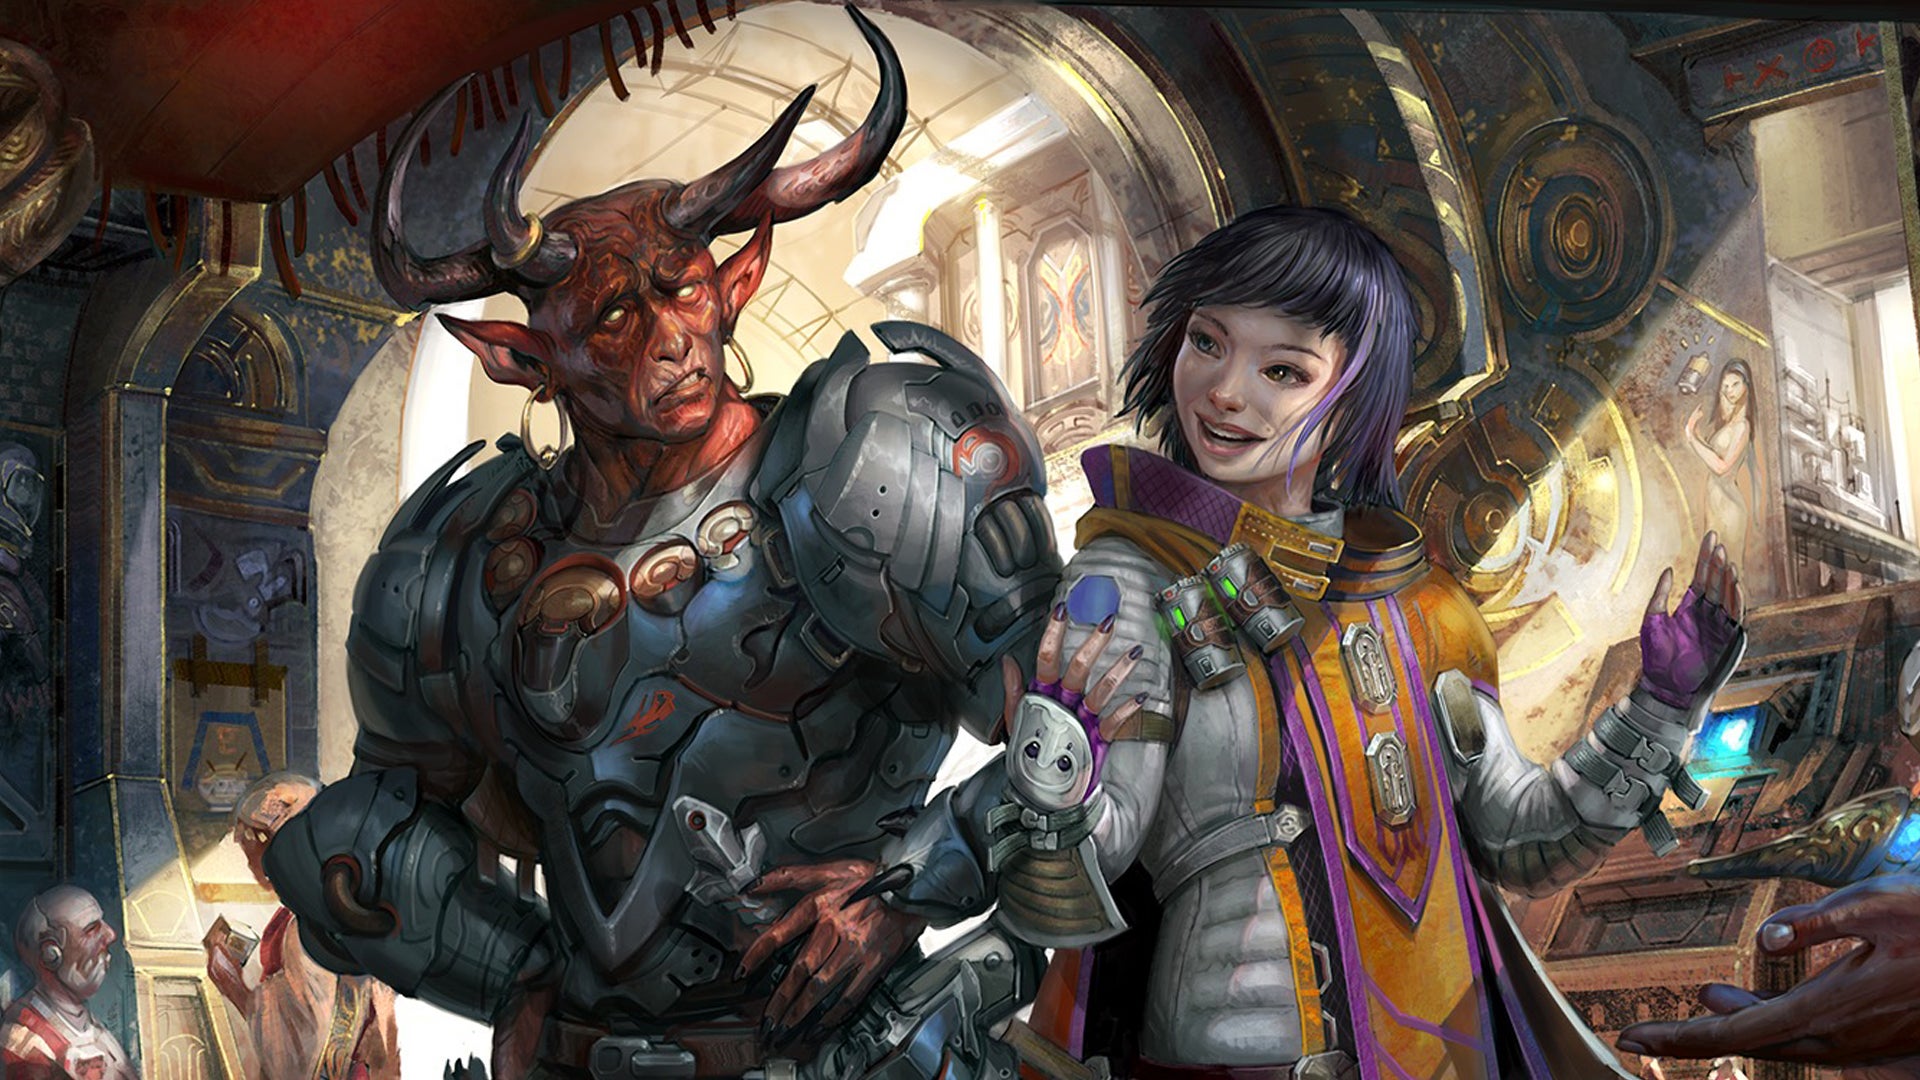 Starfinder RPG’s episodic Amazon Alexa game is out now, stars Critical Role...